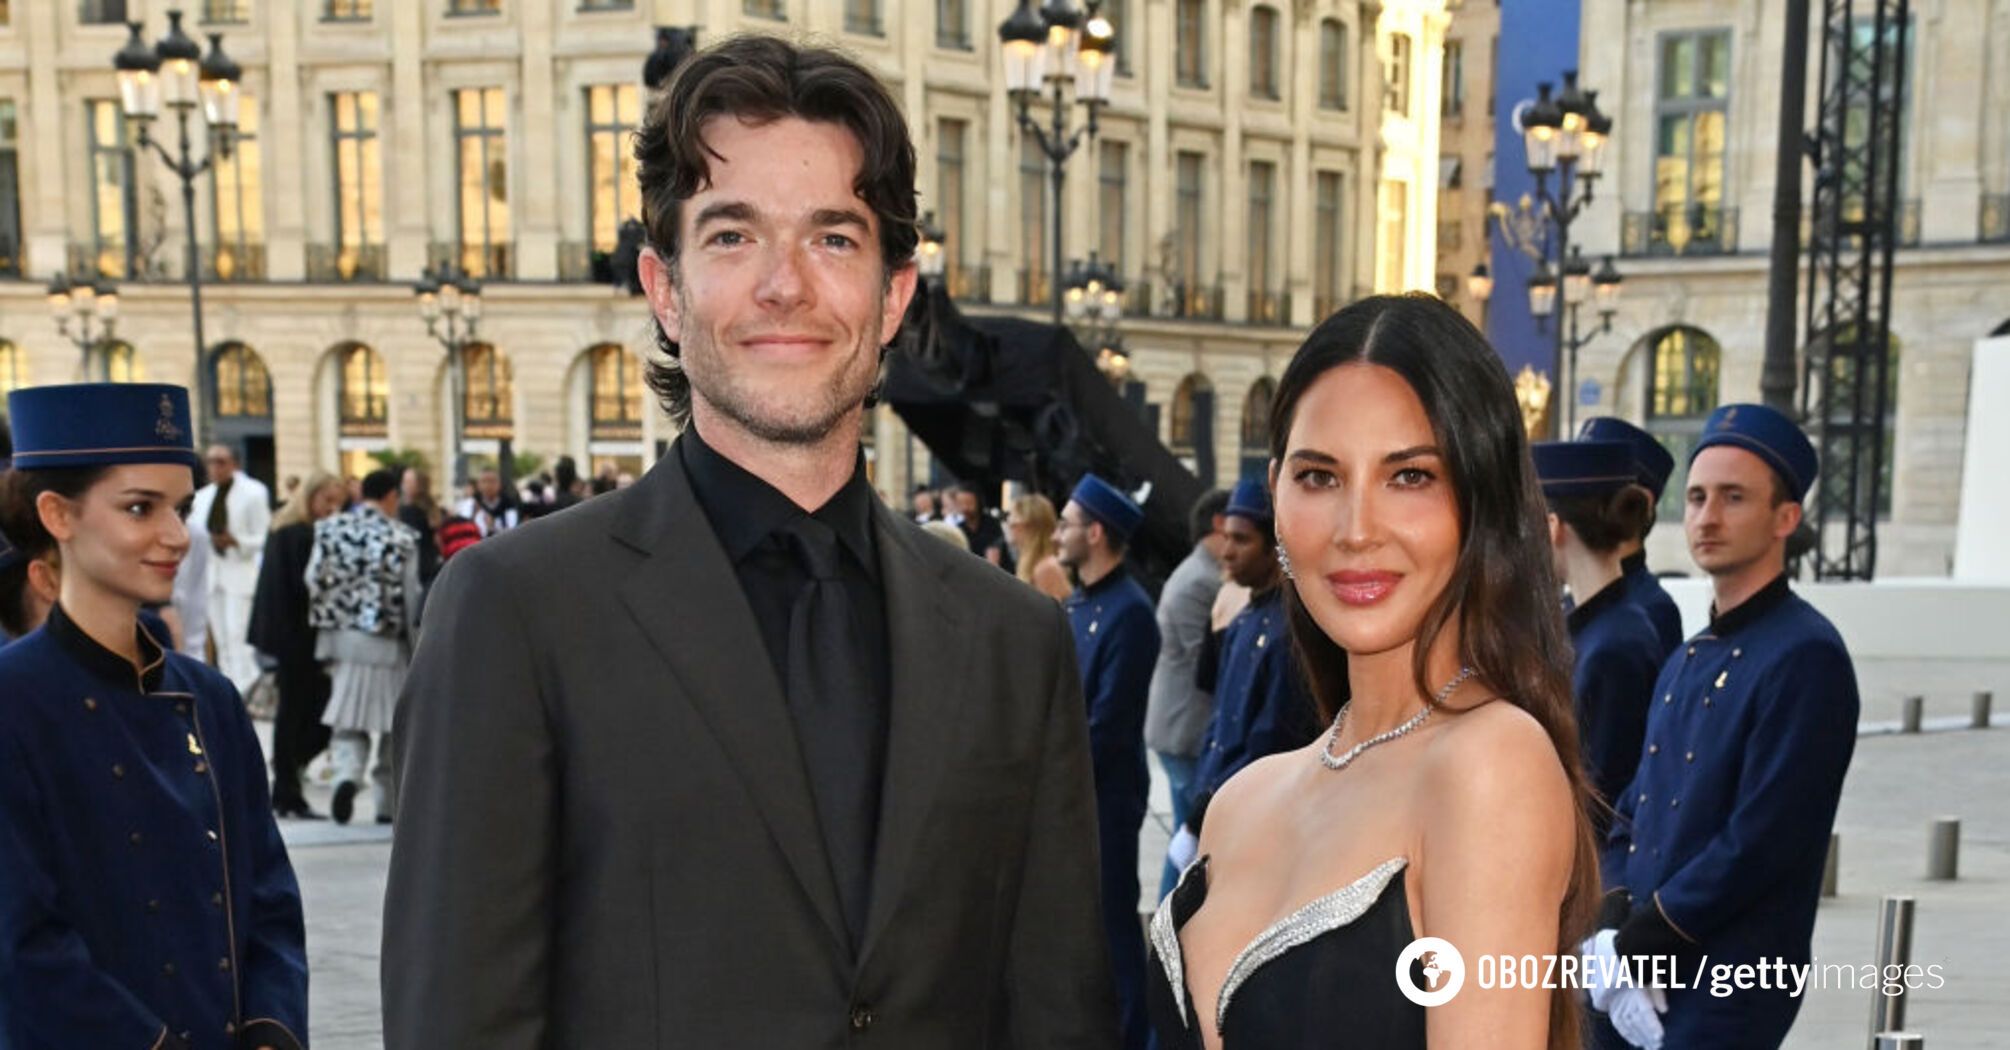 Cancer patient Olivia Munn secretly married actor John Mulaney: not even friends were invited